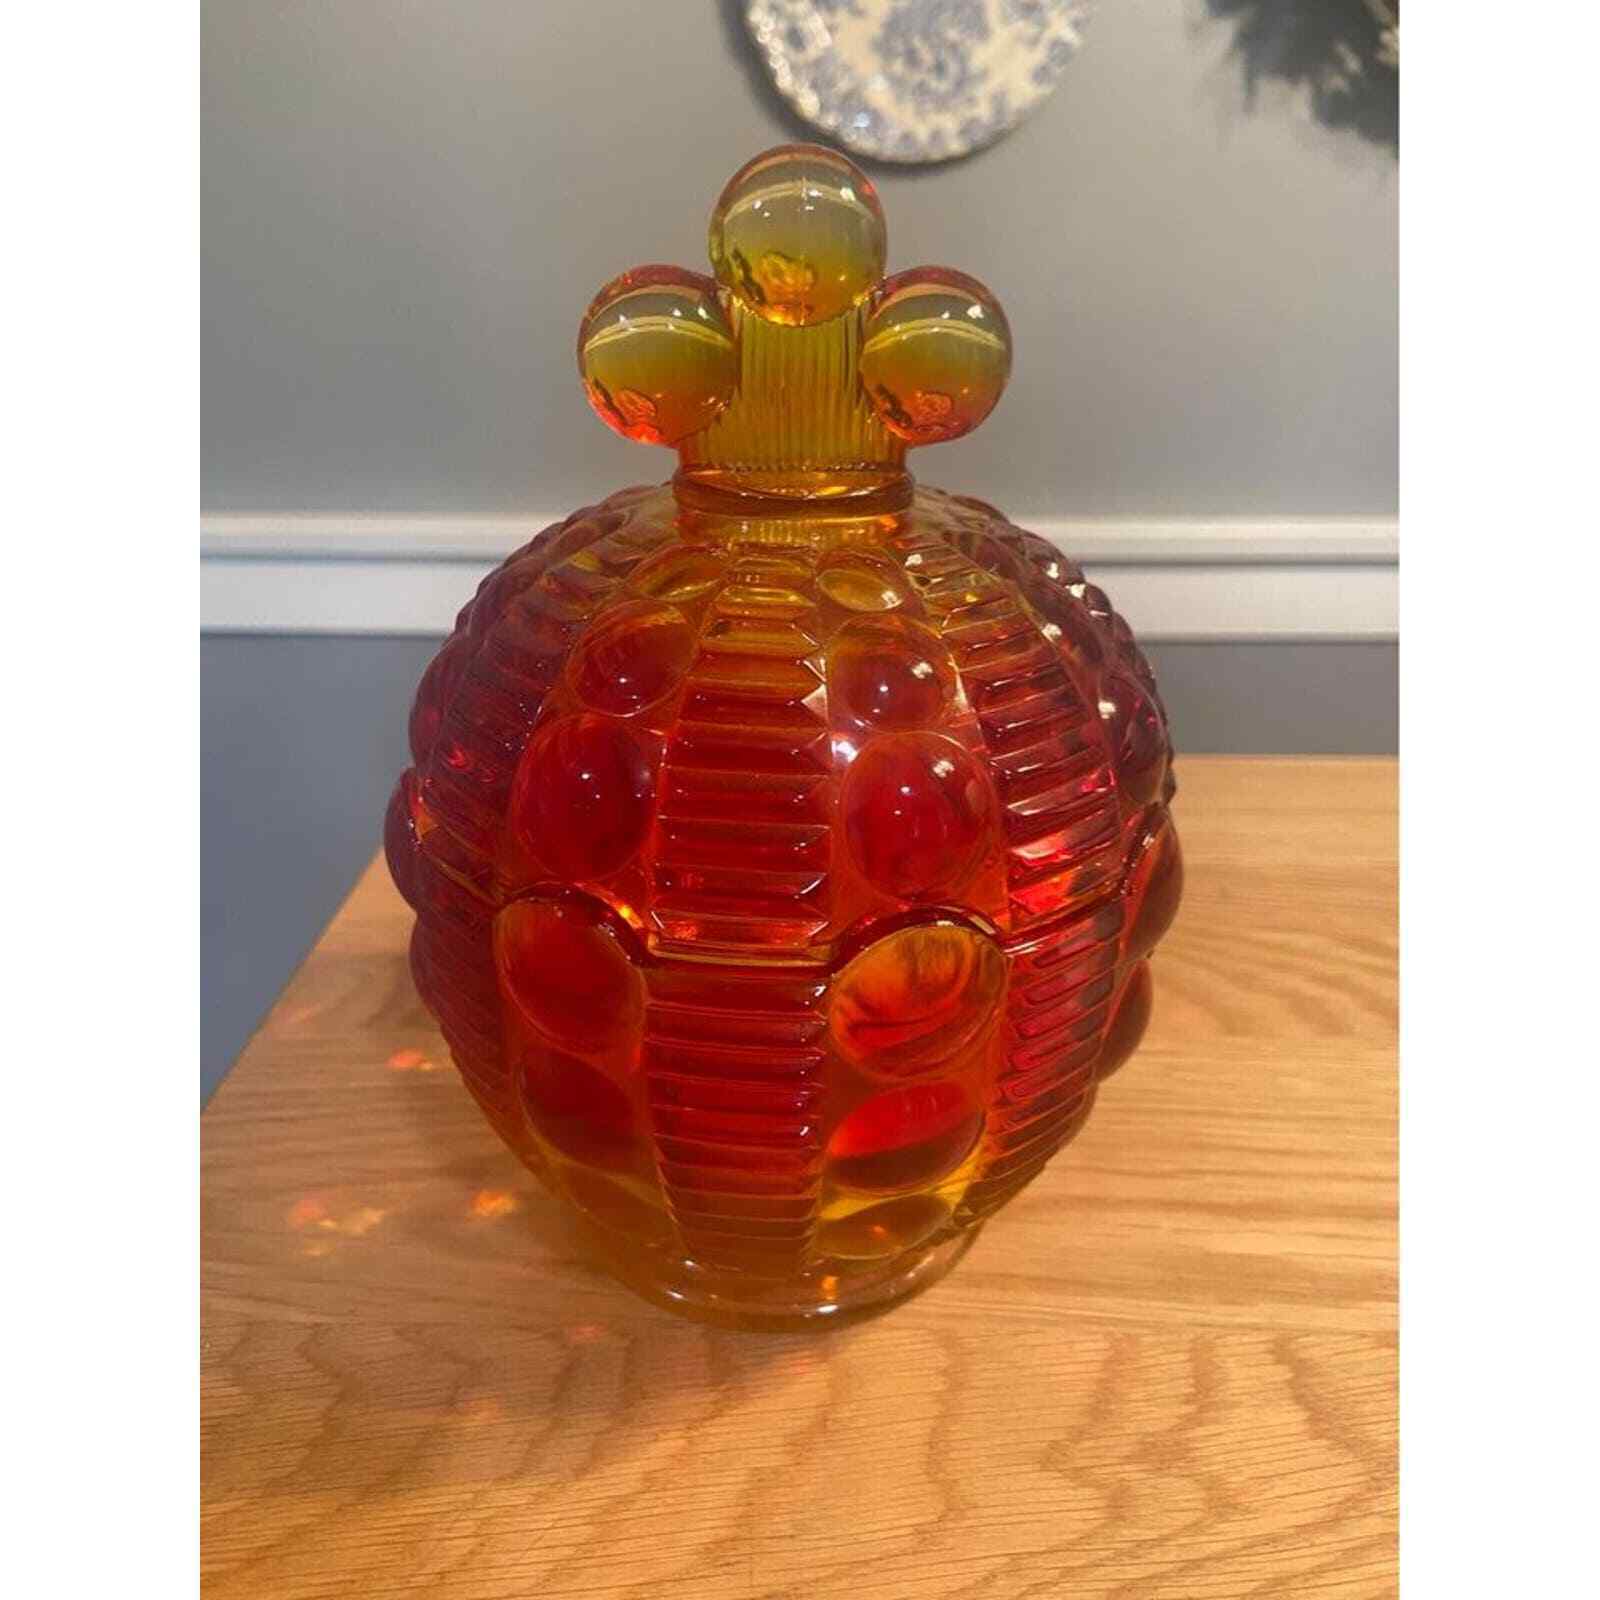 Indiana Glass Tiara Exclusives Sunset Dewdrop Covered Candy Jar